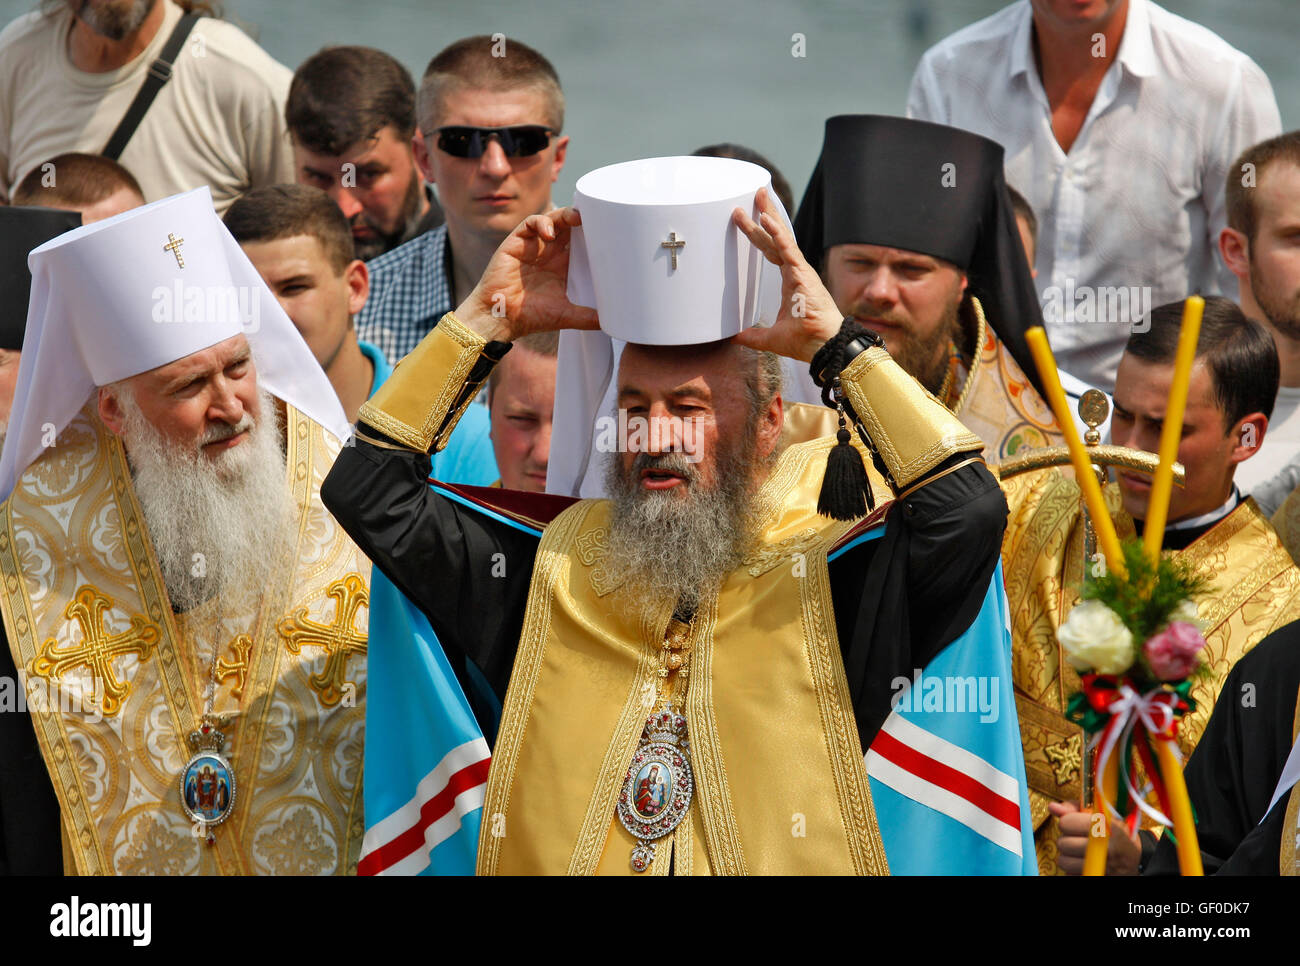 The Head of the Ukrainian Orthodox Church of the Moscow Patriarchate Metropolitan Onufry (C) attends a prayer service at the St. Vladimir's Hill in Kiev, on July 27, 2016. Ukrainian believers, priests and nuns of Ukrainian Orthodox Church of Moscow Patriarchy took part in a procession of the cross to mark the anniversary of the Baptism of Kievan Rus in Kiev. But supporters of the Ukrainian Orthodox Church of Kiev Patriarchy believe that the procession of the cross is organized by pro-Russian powers to destabilize the political situation in the country. (Photo by Vasyl Shevchenko/ Pacific Press Stock Photo